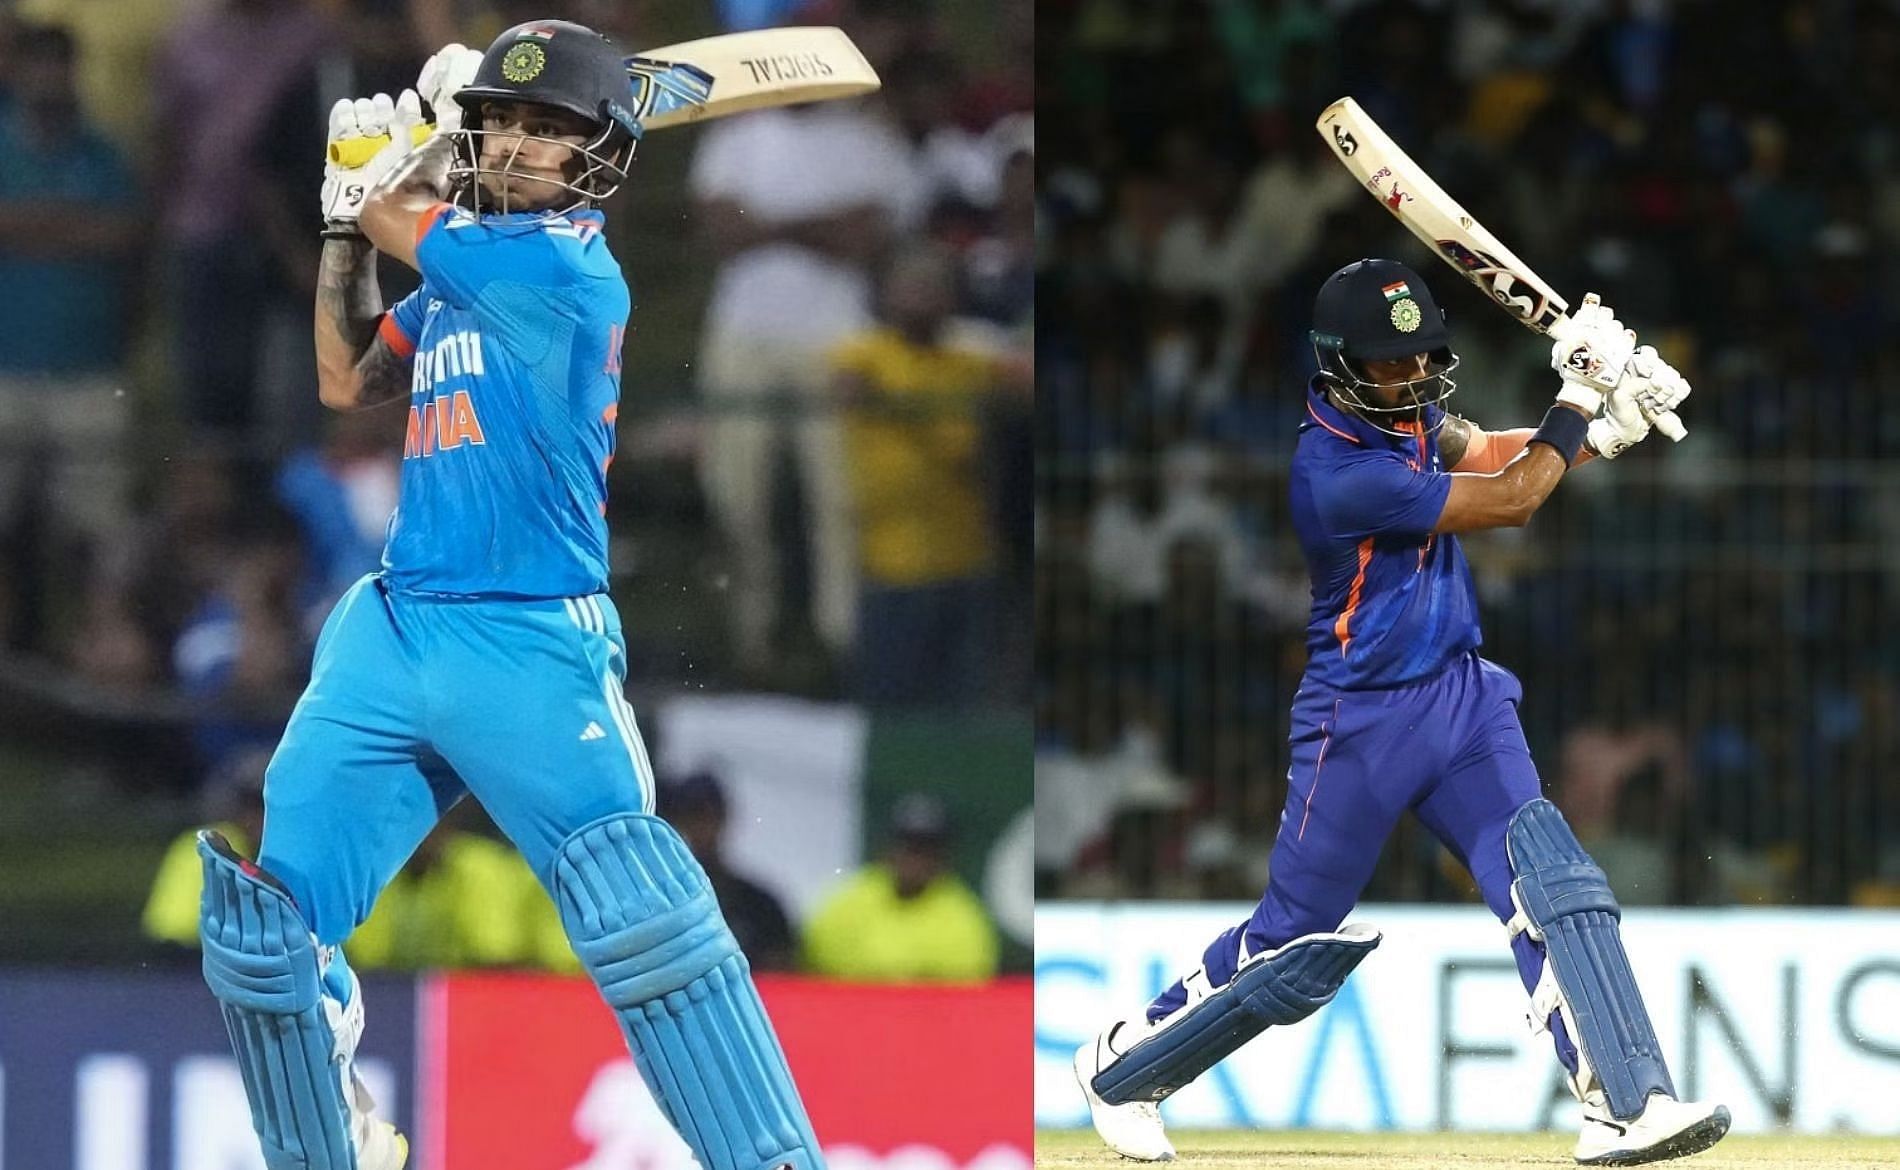 Ishan Kishan and KL Rahul are the two wicketkeeper-batters in India